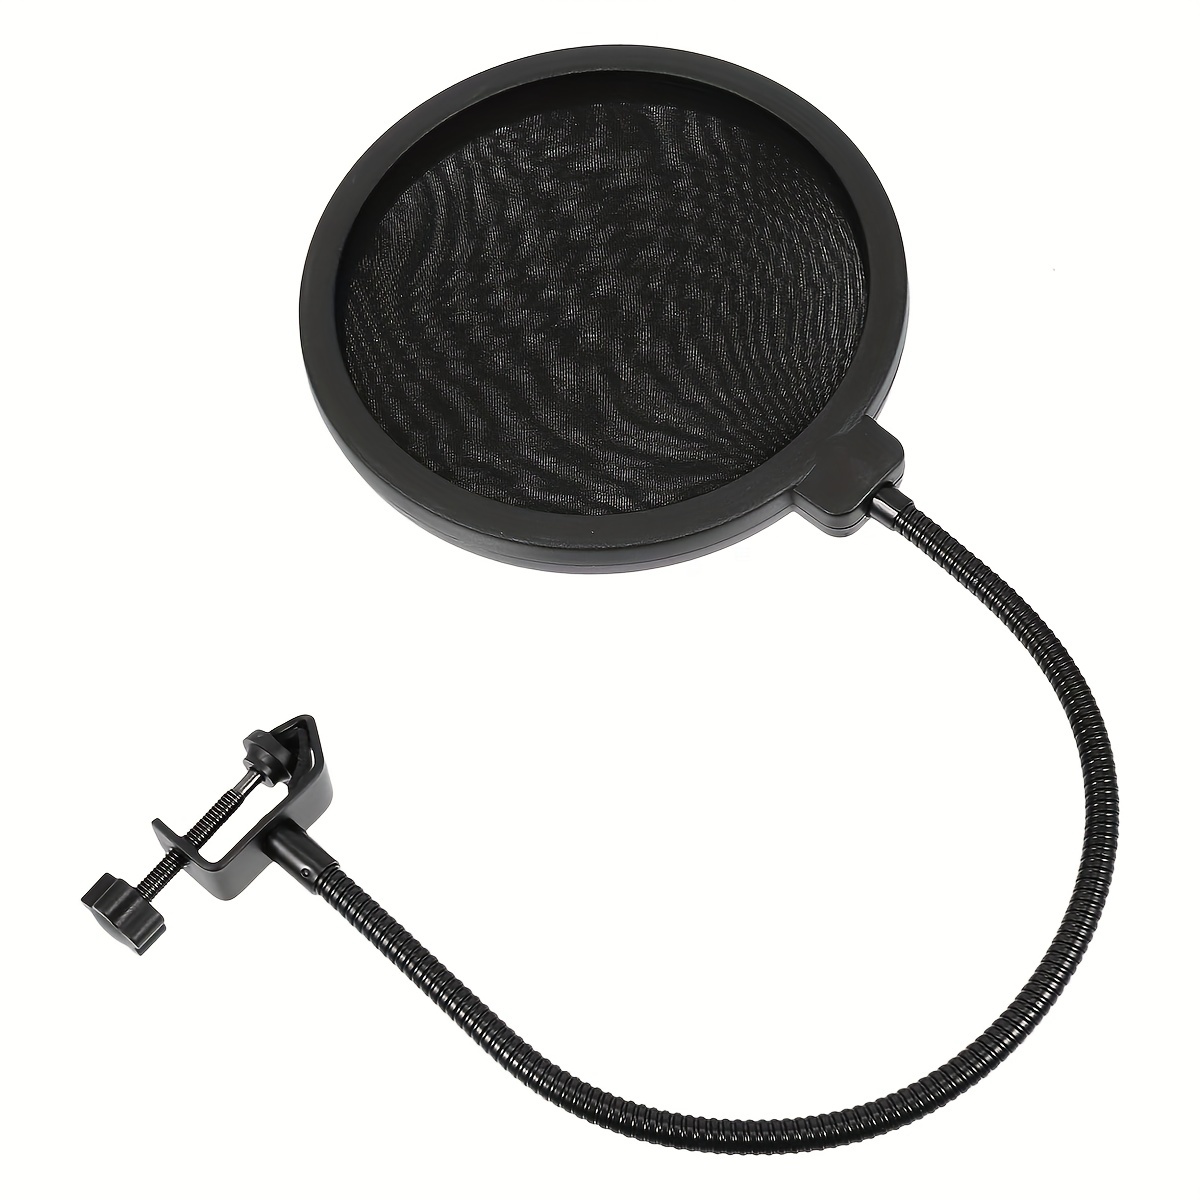 EJT Upgraded Microphone Pop Filter Mask Shield for Blue Yeti and Other Mic,  6 Inch Dual Layered Pop Wind Screen with Enhanced Flexible 360° Gooseneck